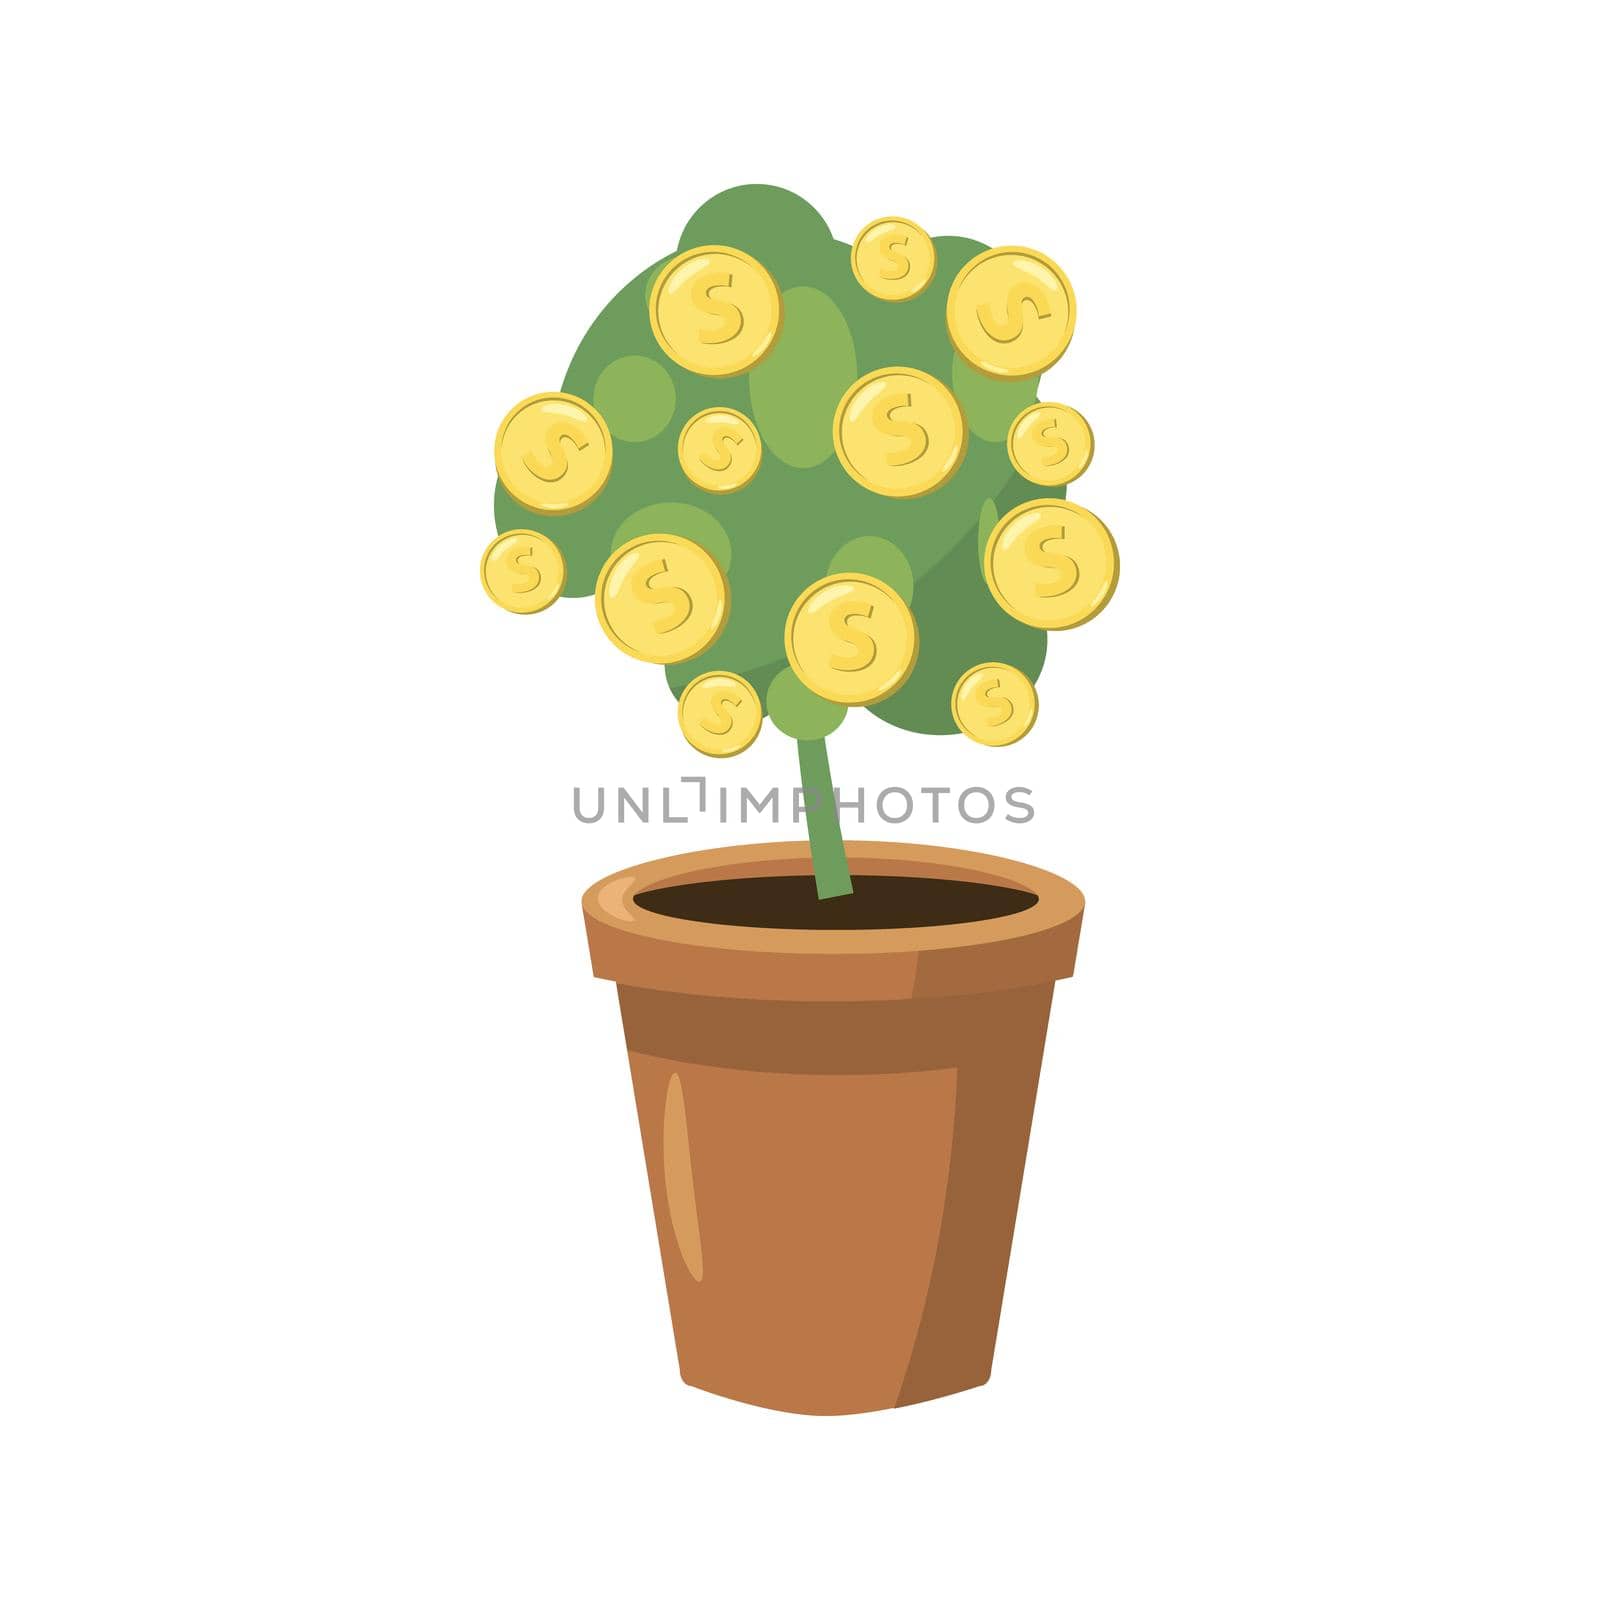 Decorative tree in flowerpot icon in cartoon style on a white background